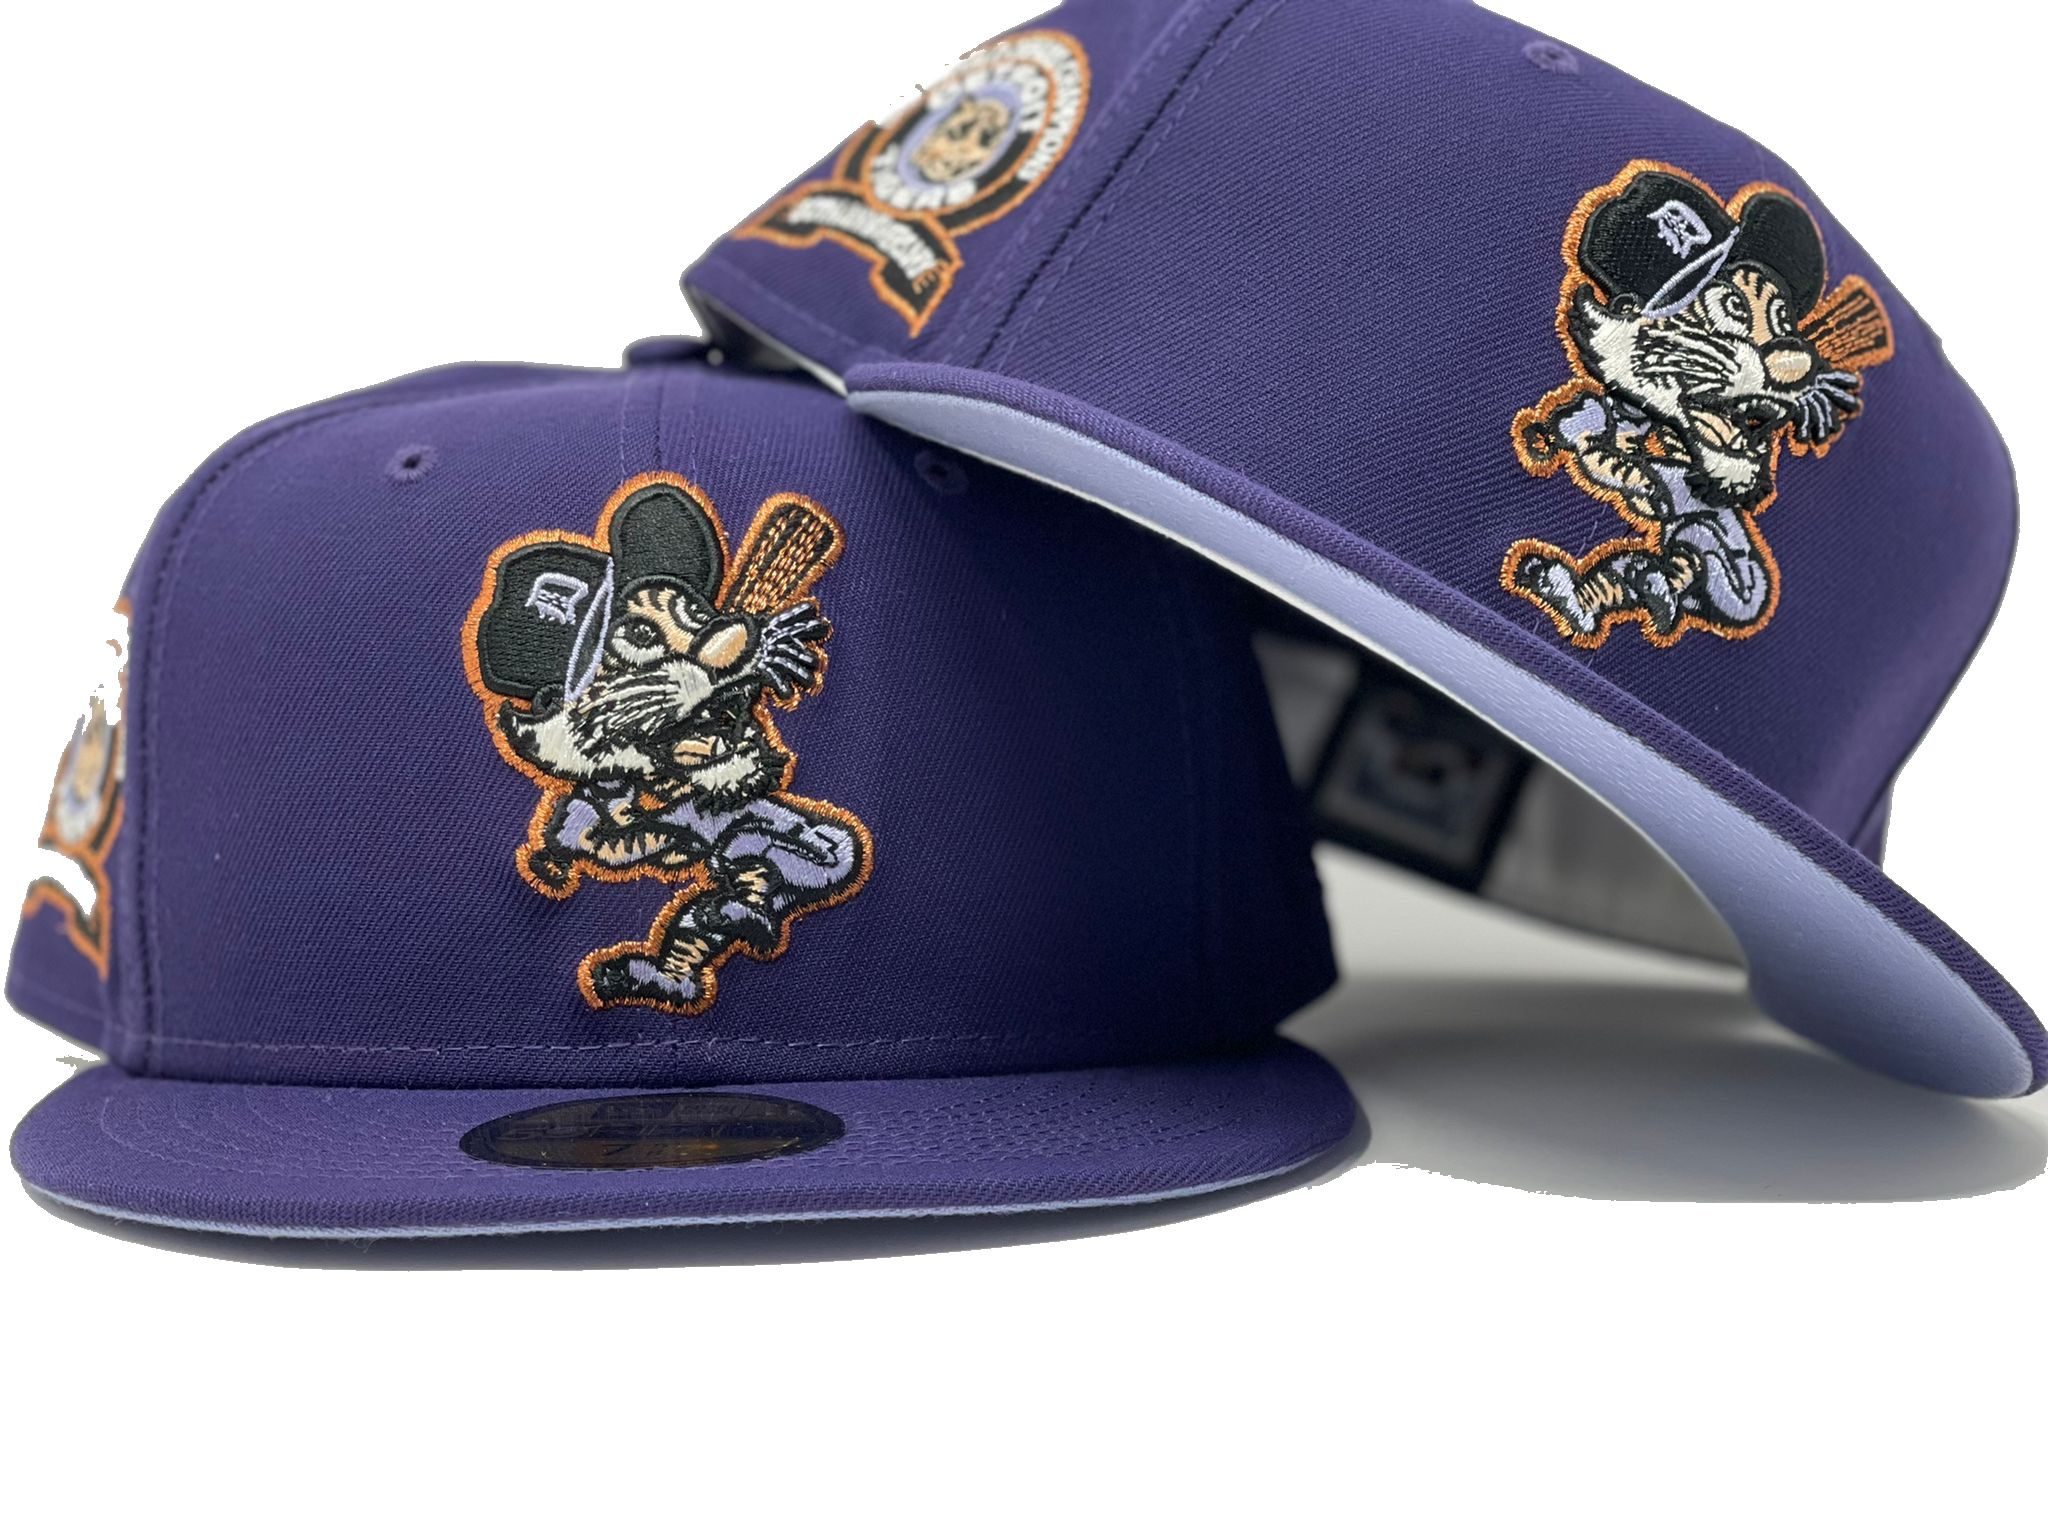 New Era Purple Detroit Tigers Vice 59FIFTY Fitted Hat